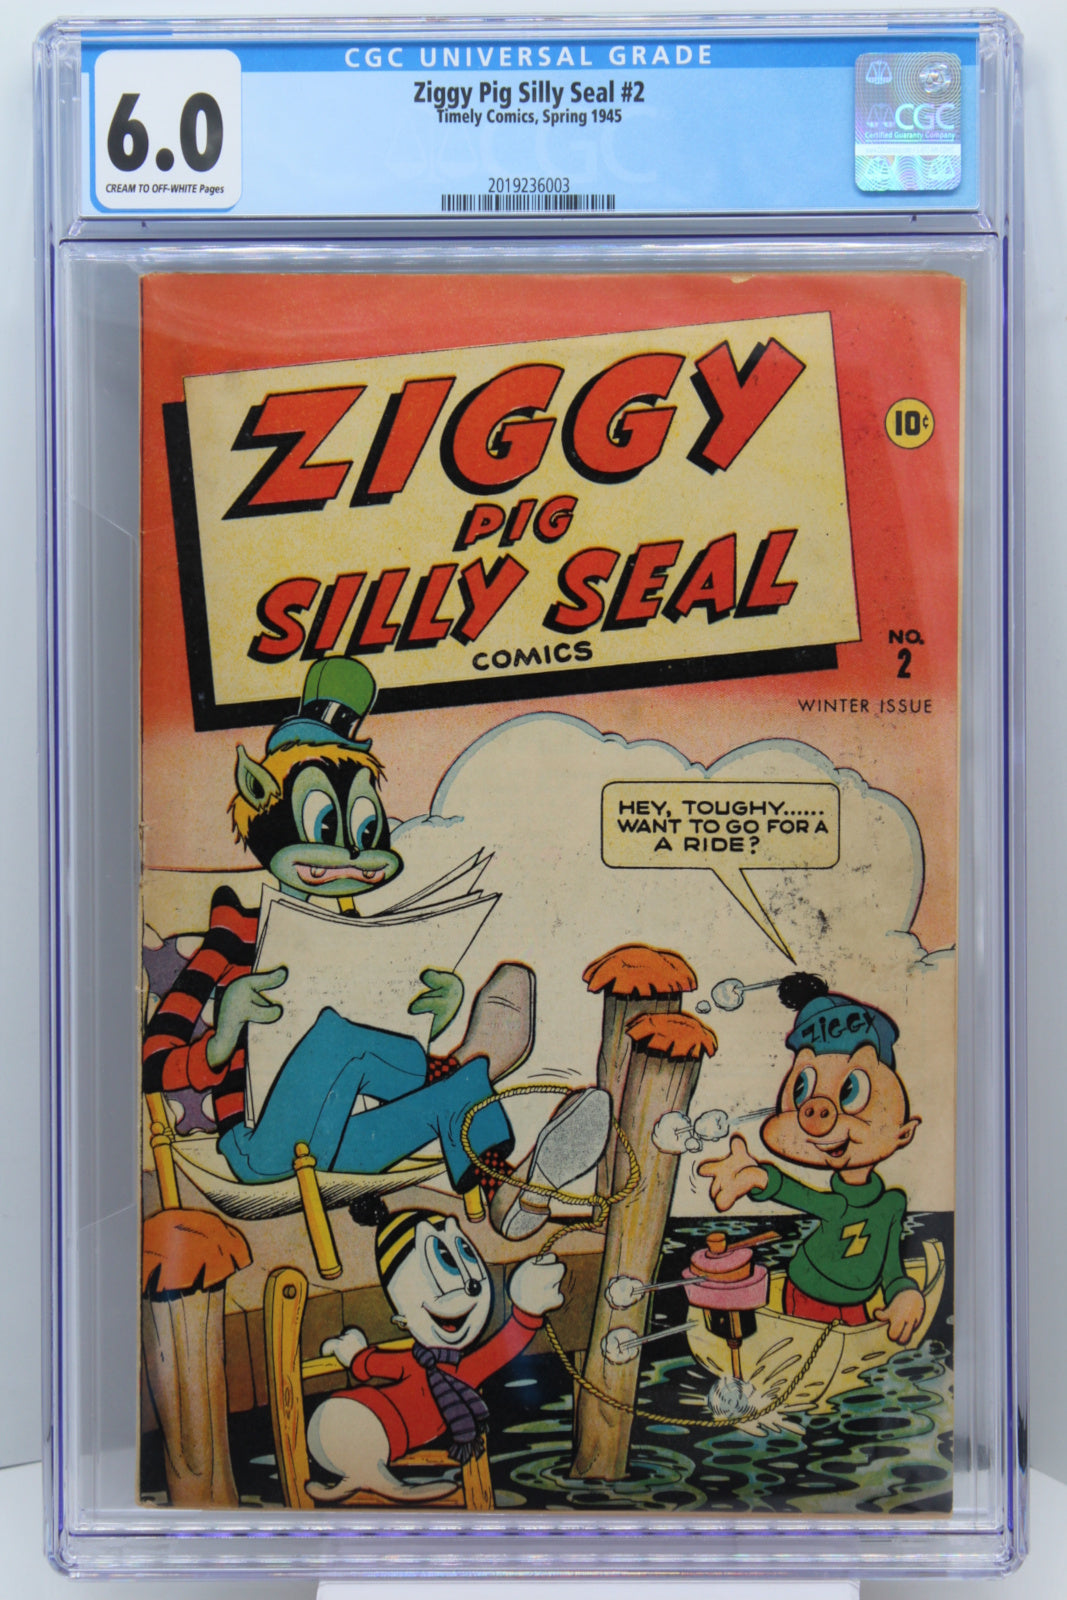 Ziggy Pig Silly Seal #2 CGC 6.0, Timely Golden Age